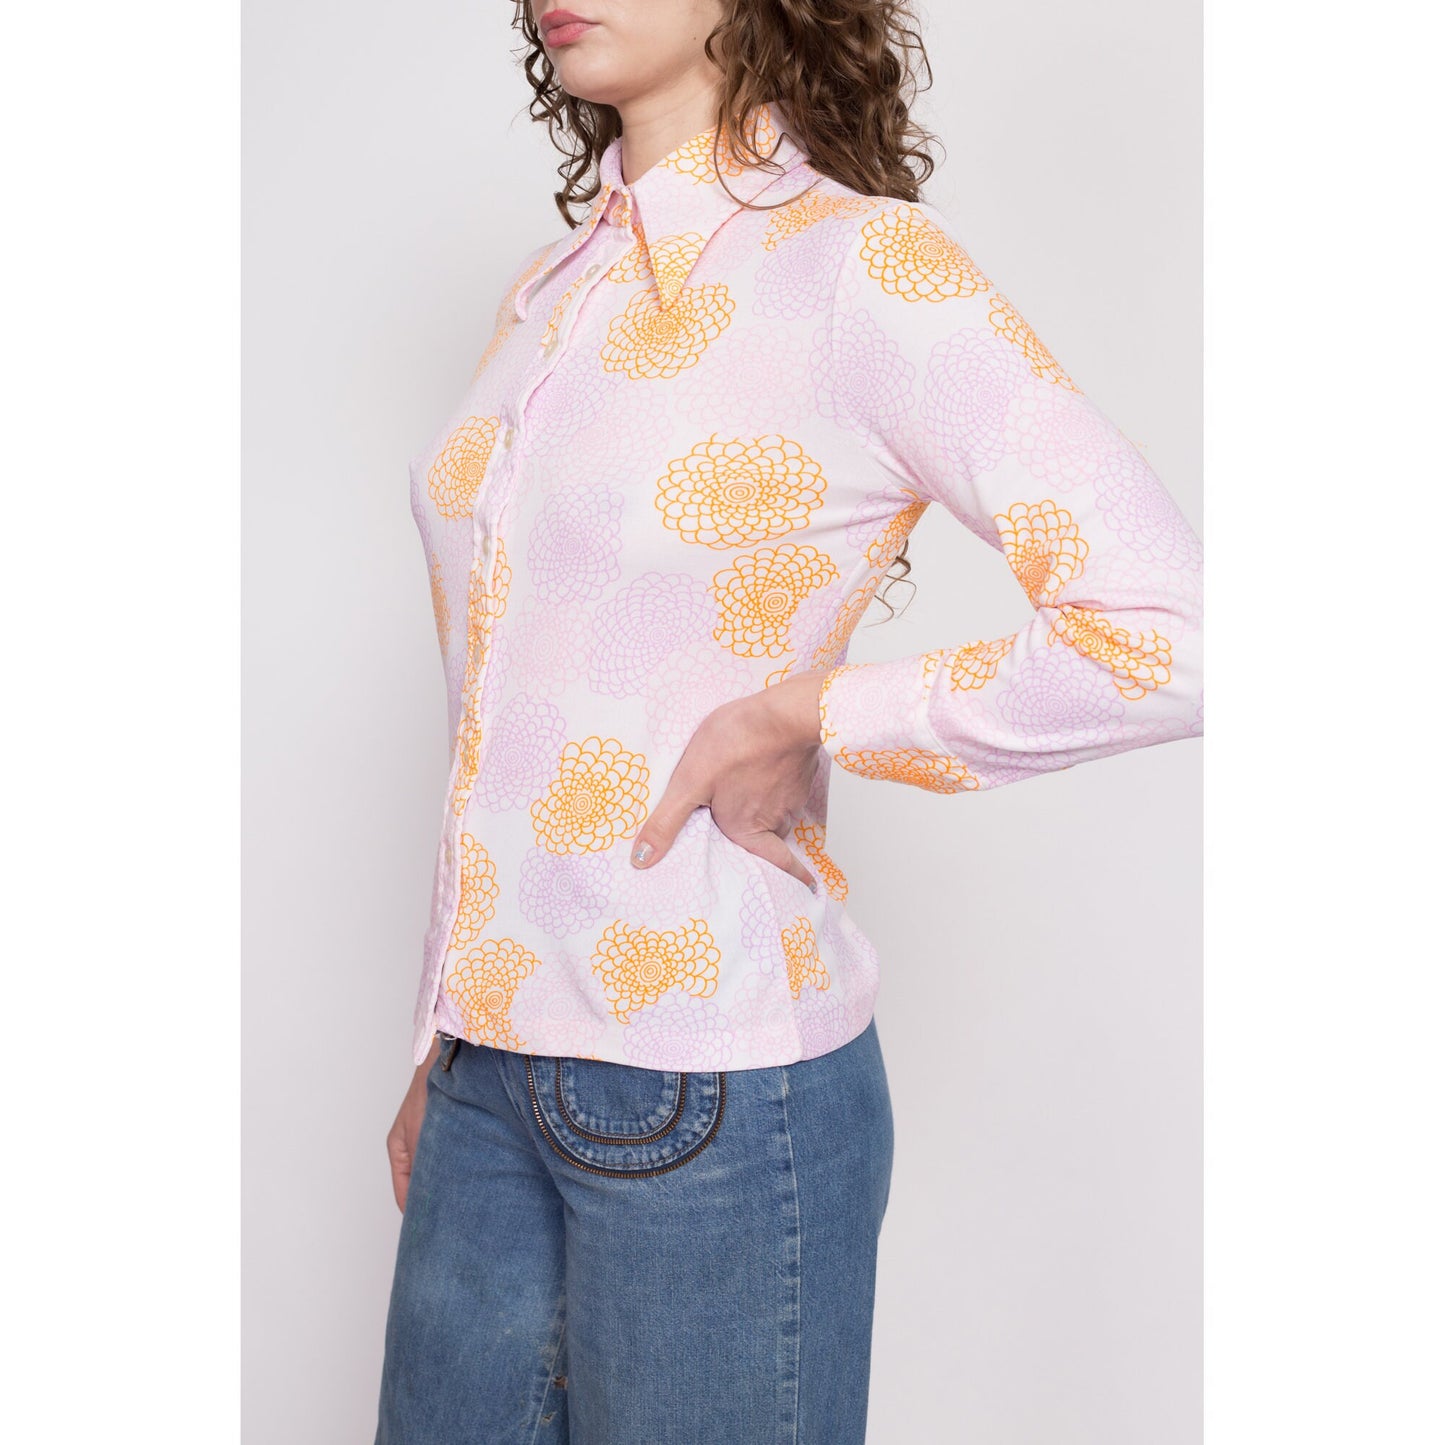 70s Peony Abstract Print Button Up Shirt - Medium | Vintage Long Sleeve Collared Novelty Floral Disco Shirt